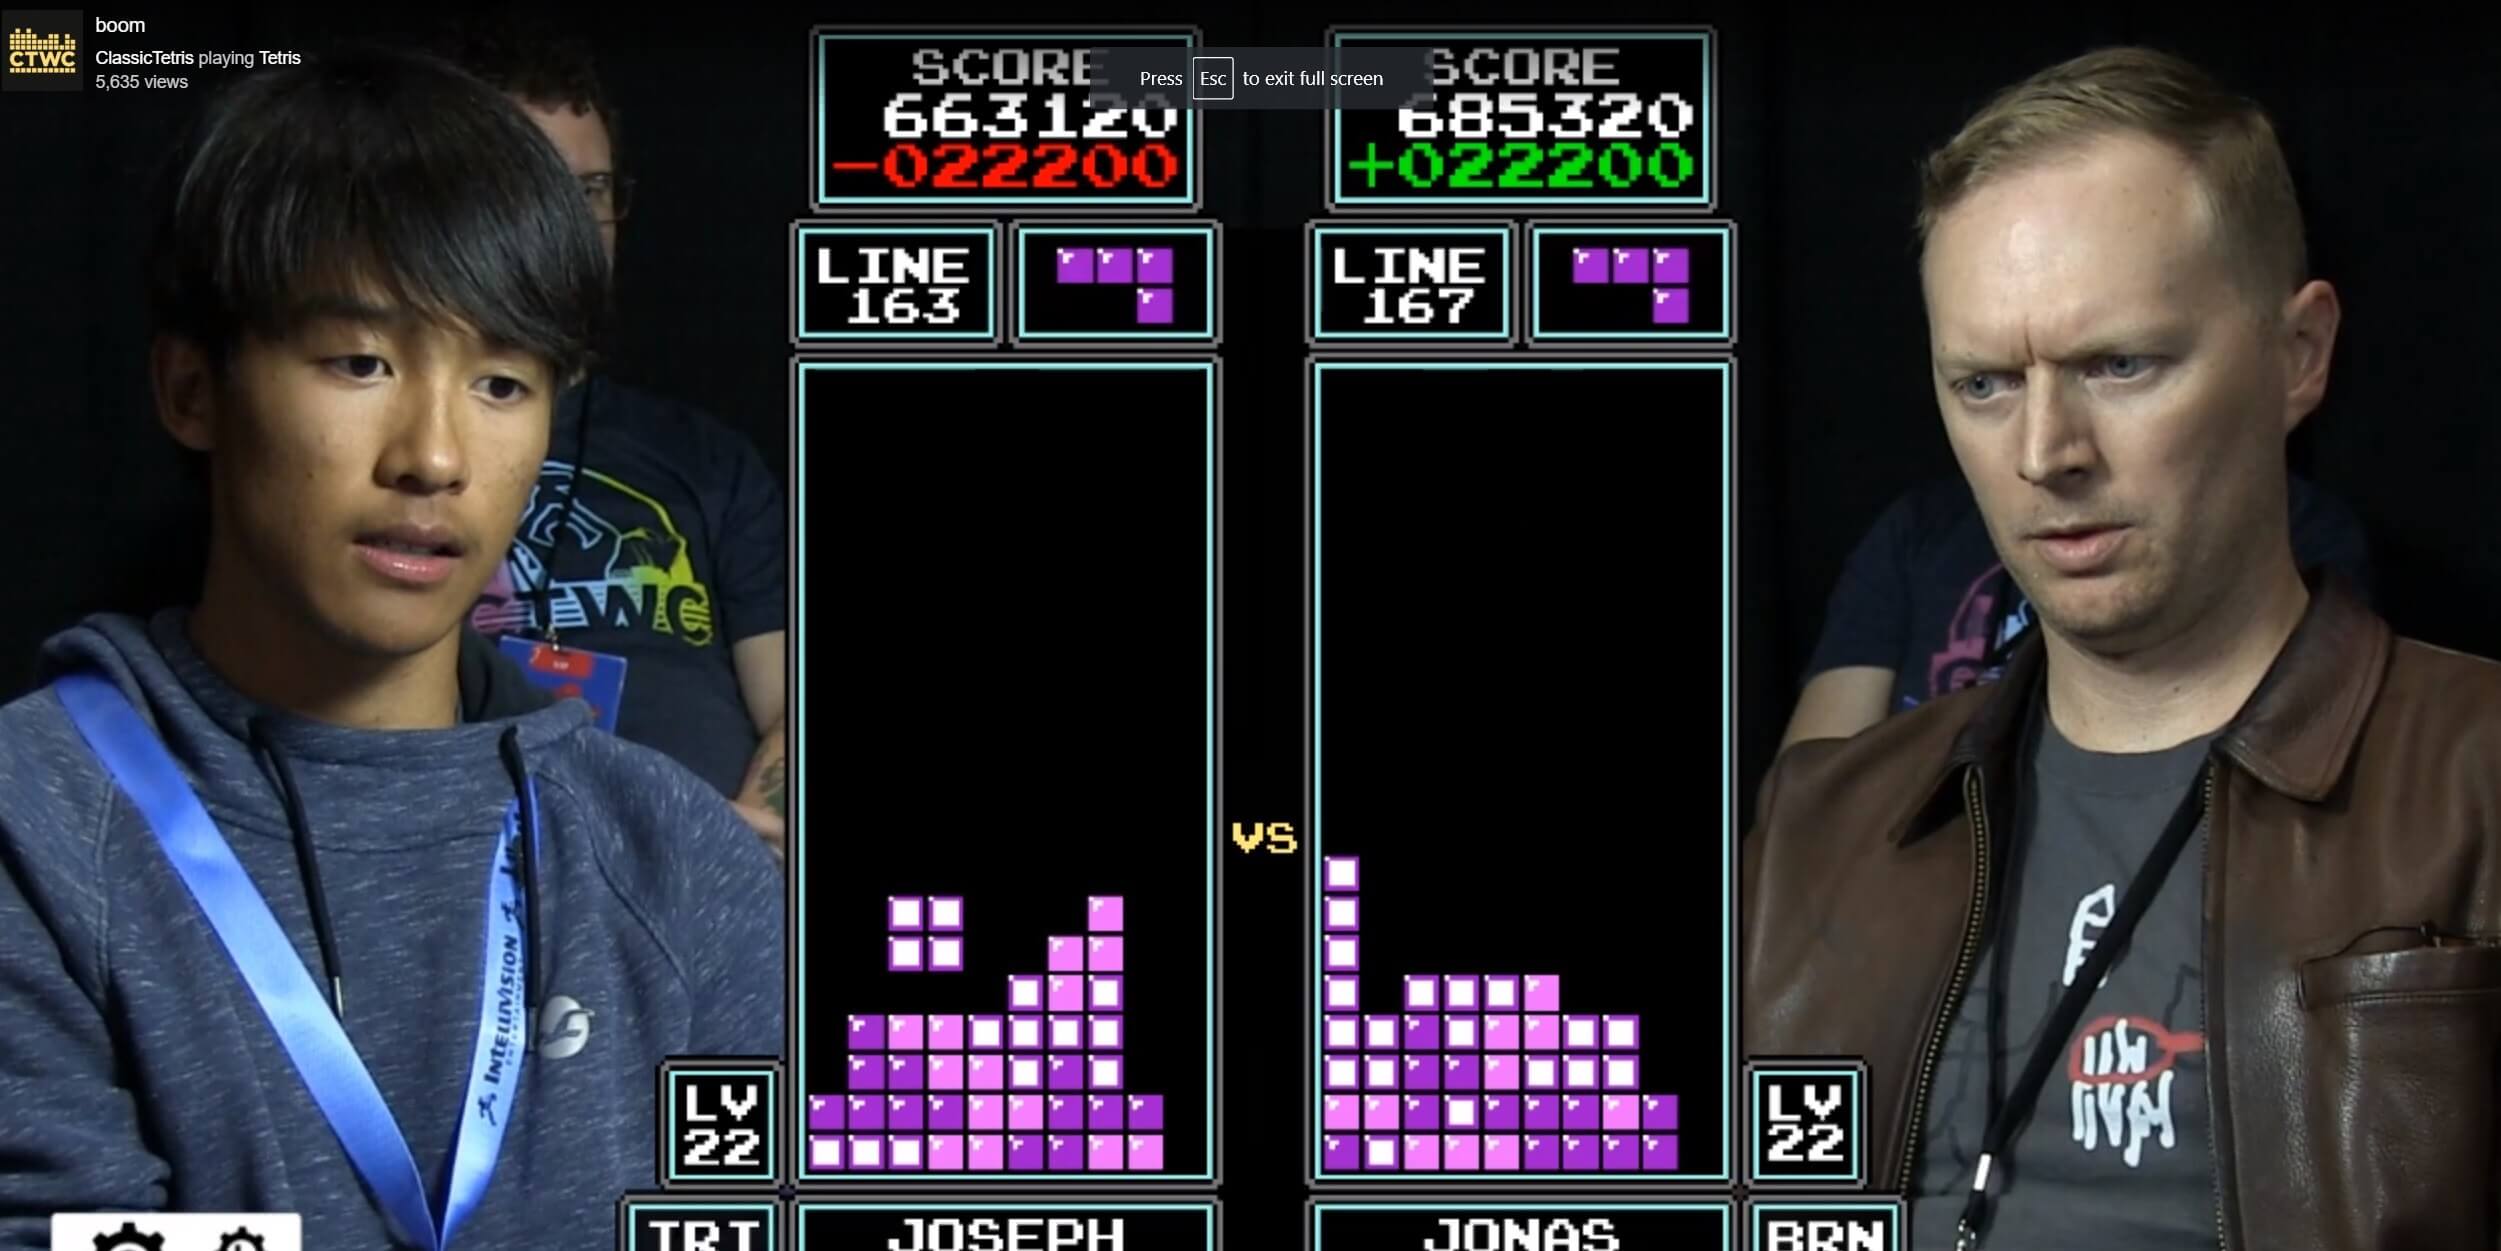 16-year-old beats seven-time winner to become new Tetris champ